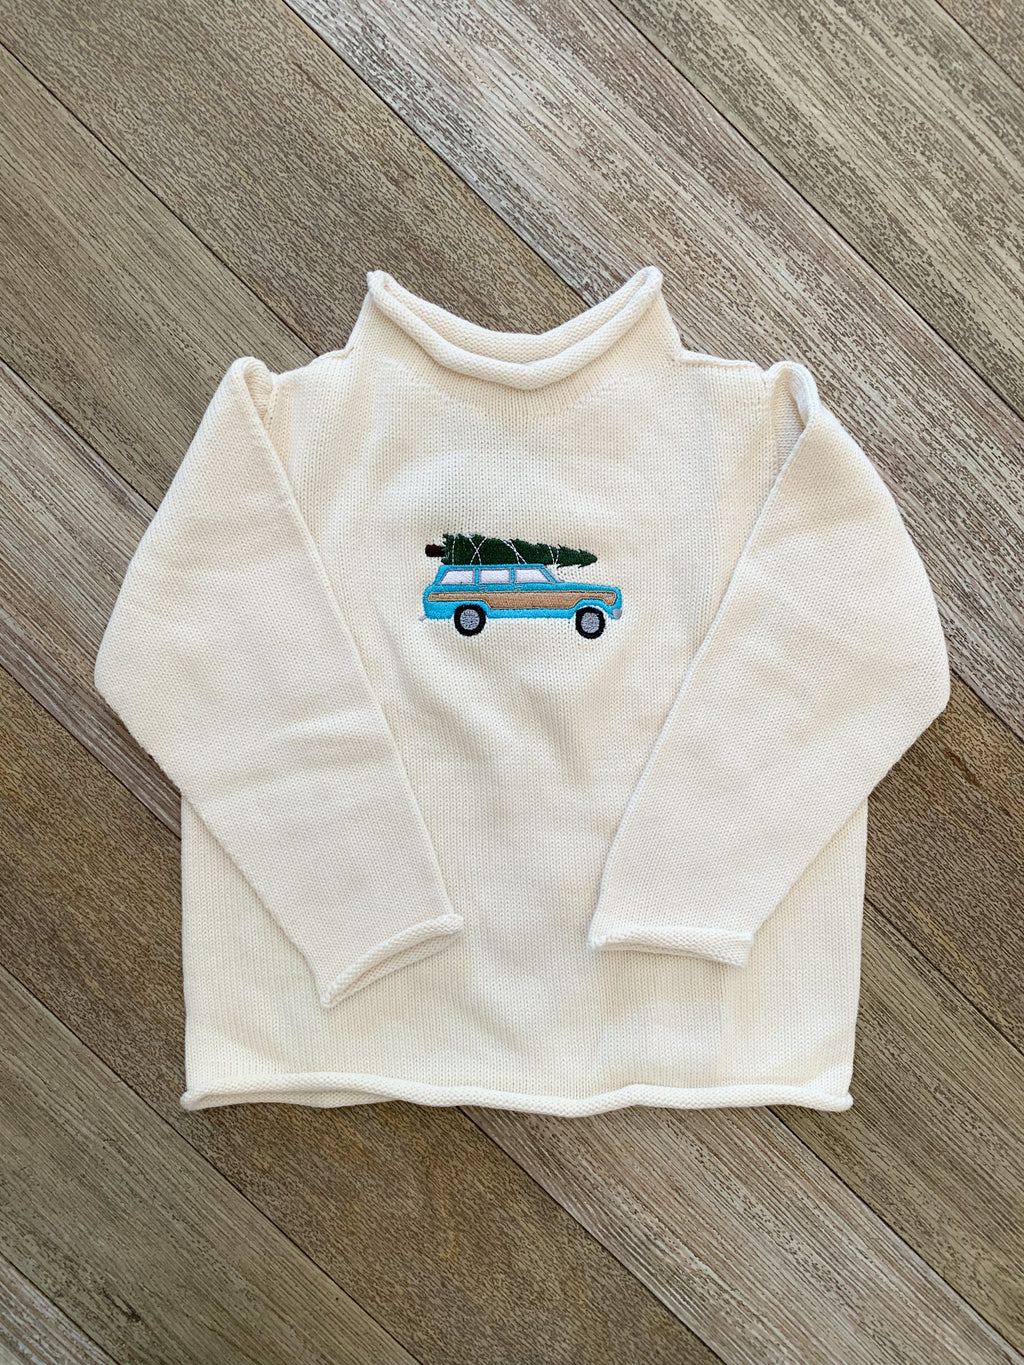 A Soft Idea Roll Neck Sweater in Cream with Woody Wagoneer + Tree